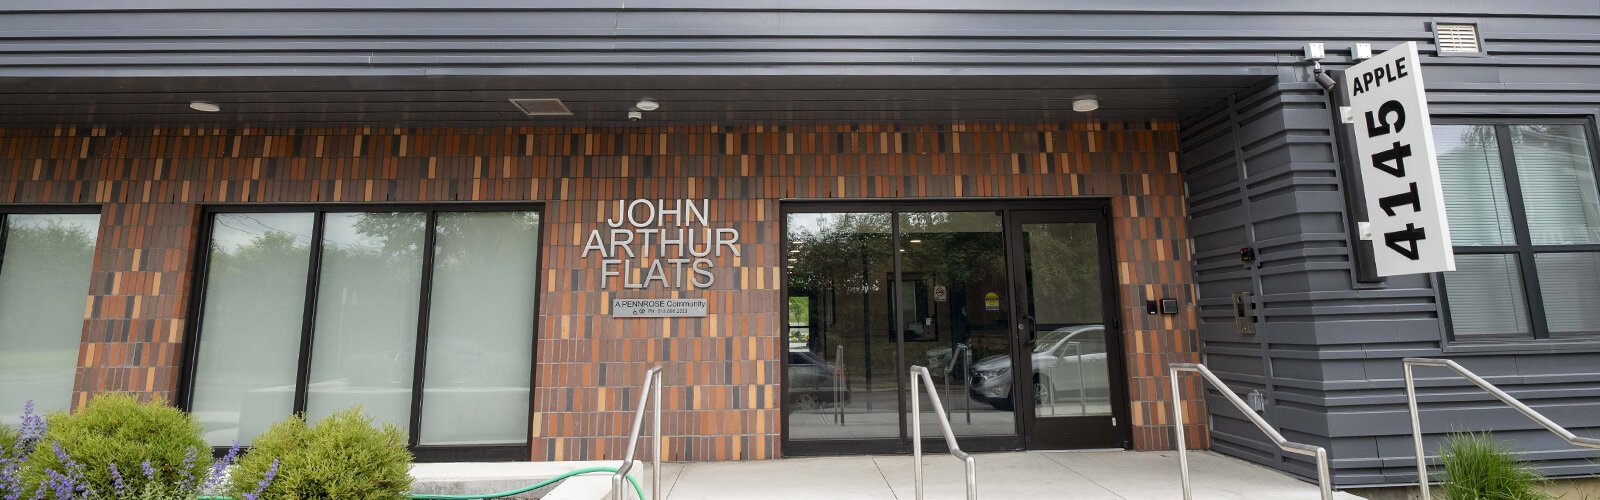 John Arthur Flats primarily serves a 55+, LGBTQ+ community with HH income 30-60% of the AMI. It’s an example of zoning variances used by community and city to incorporate high-density mixed-income housing into Northside.